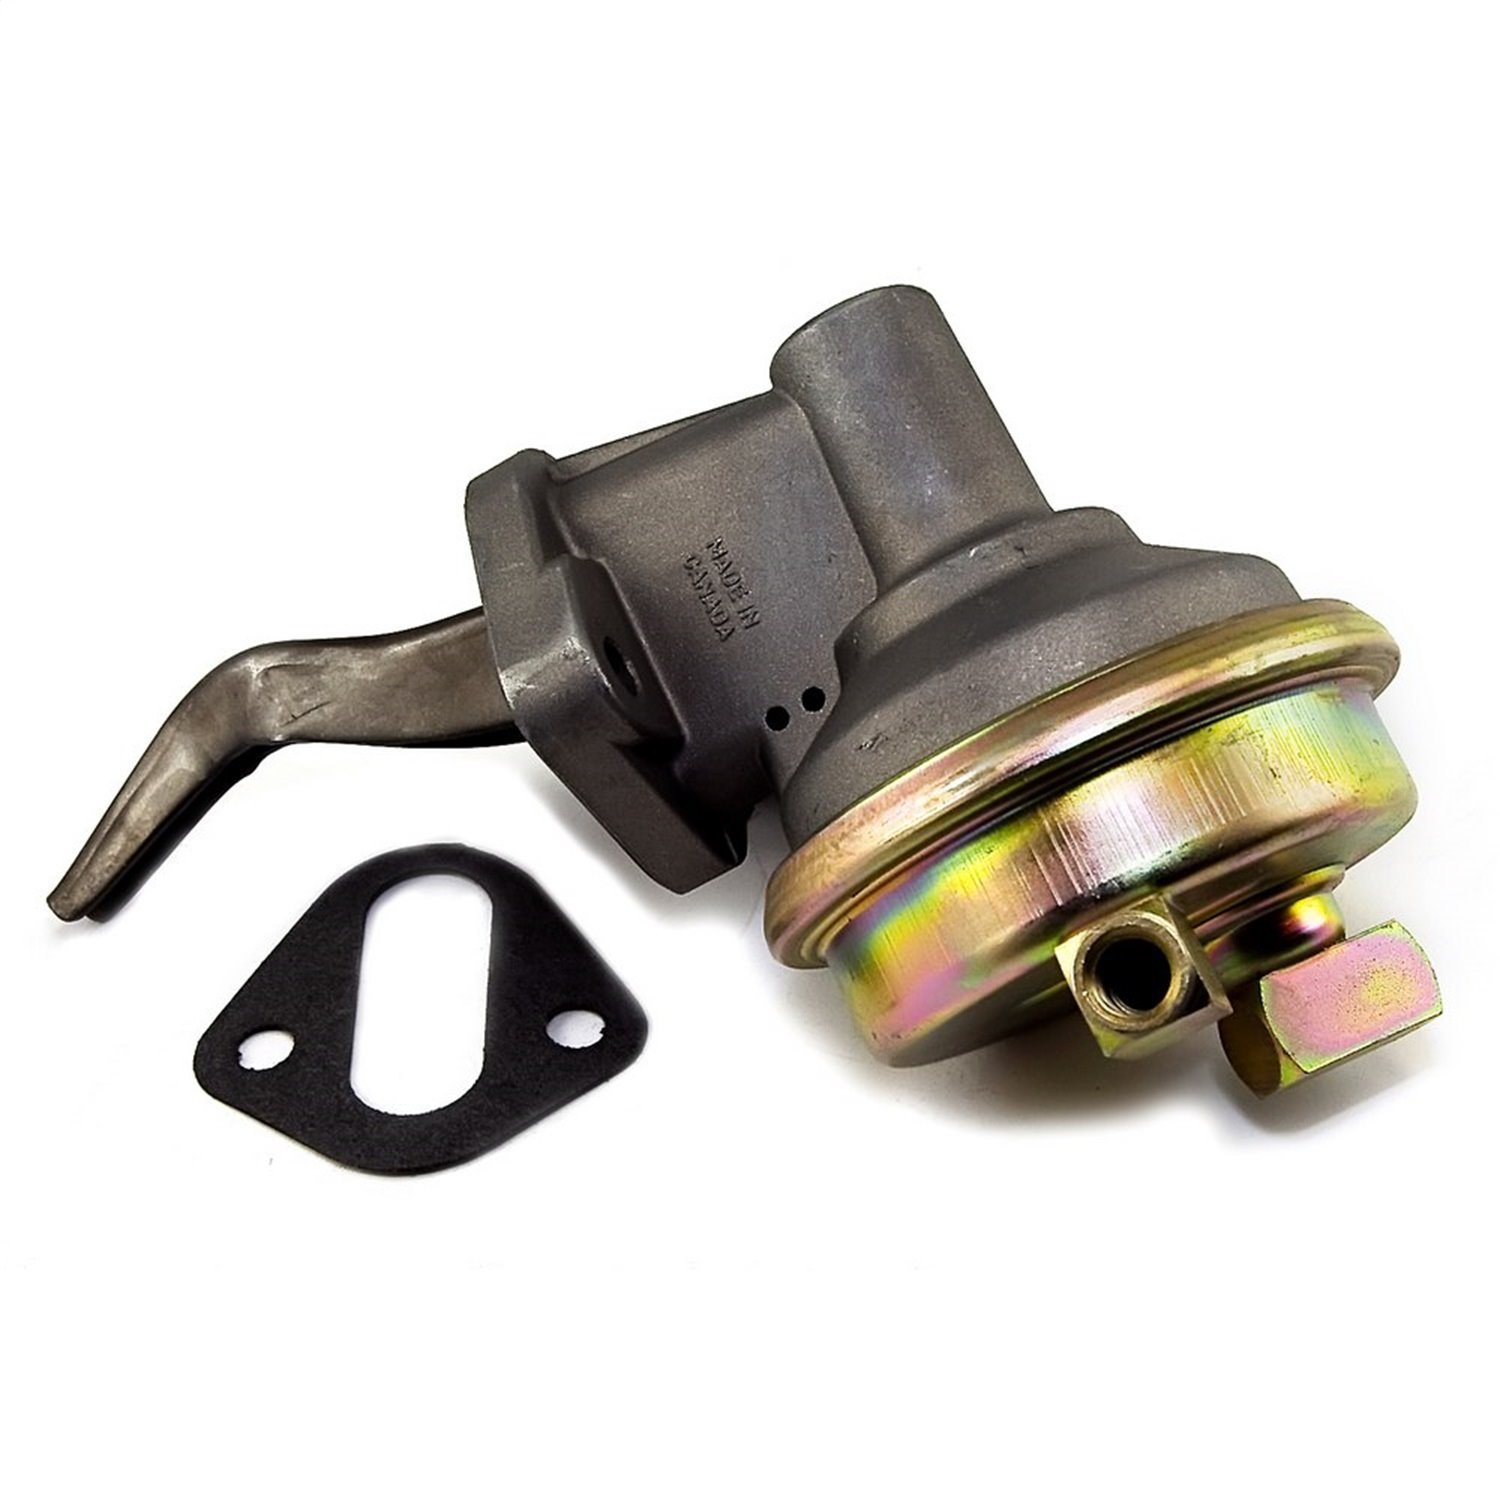 Replacement fuel pump from Omix-ADA, Fits 225 cubic inch engine found in 65-66 Jeep CJ5 and CJ6